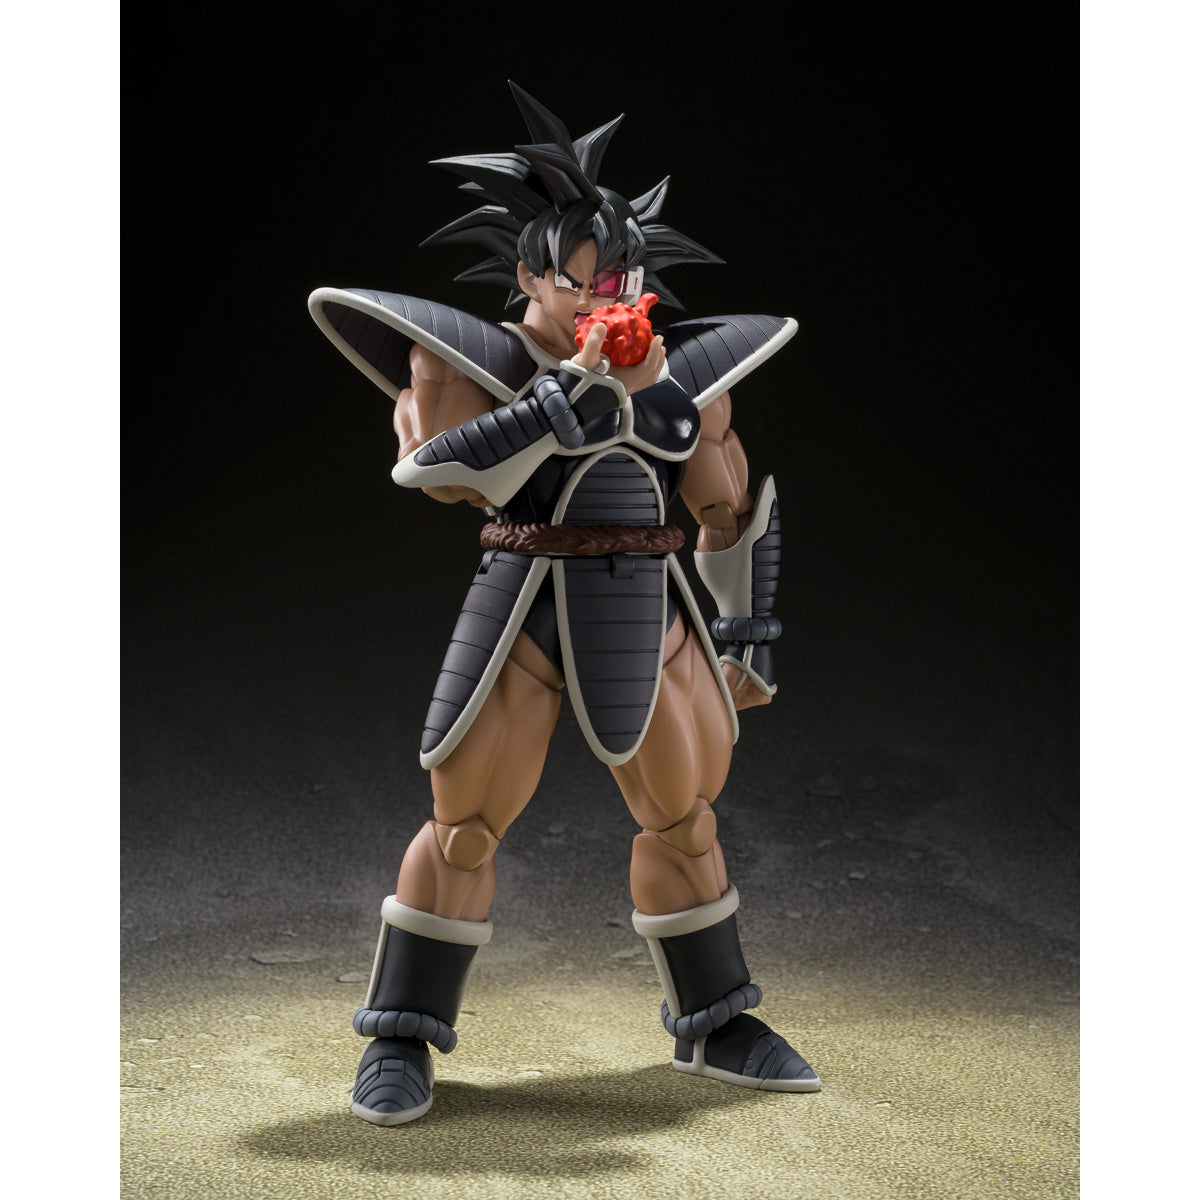 
                  
                    An articulated 5.7-inch S.H.Figuarts Turles action figure from Dragon Ball Z: The Tree of Might. The figure is detailed with various accessories including a hand holding the Tree of Might fruit, cape, crossed arms, and an energy attack effect.
                  
                